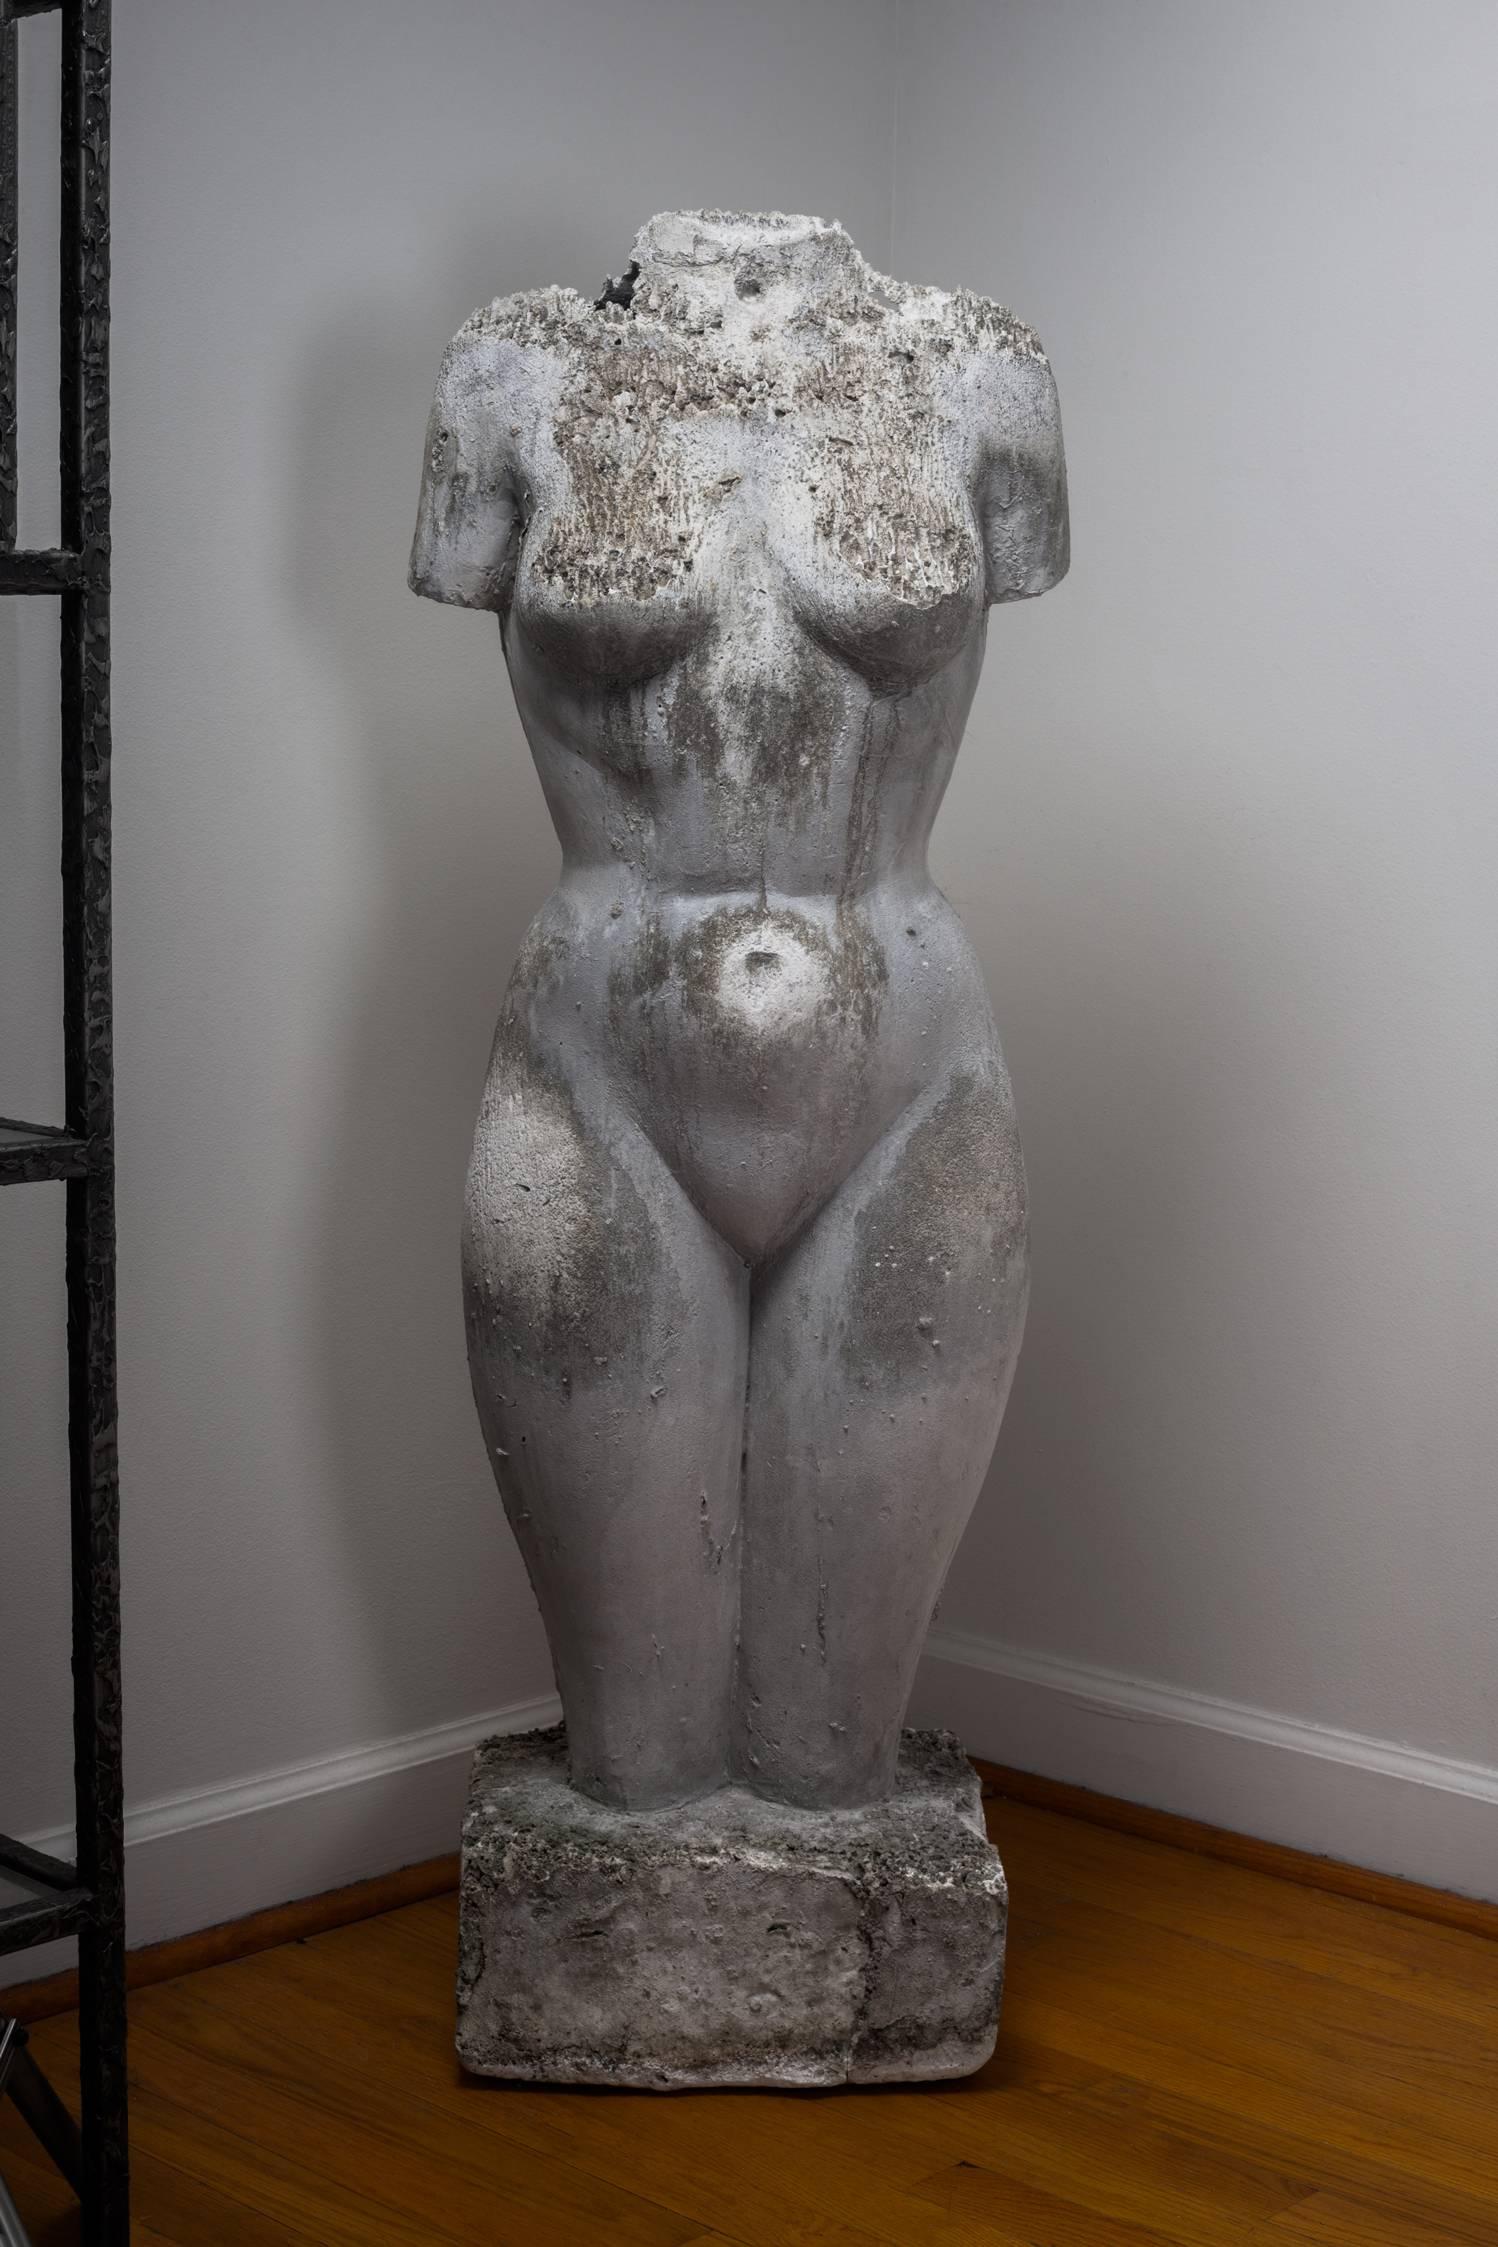 Nude female torso sculpture and large outsider art piece. Aged naturally outside the artist's atelier, this piece is one of a kind, the personal work of an artisan potter.